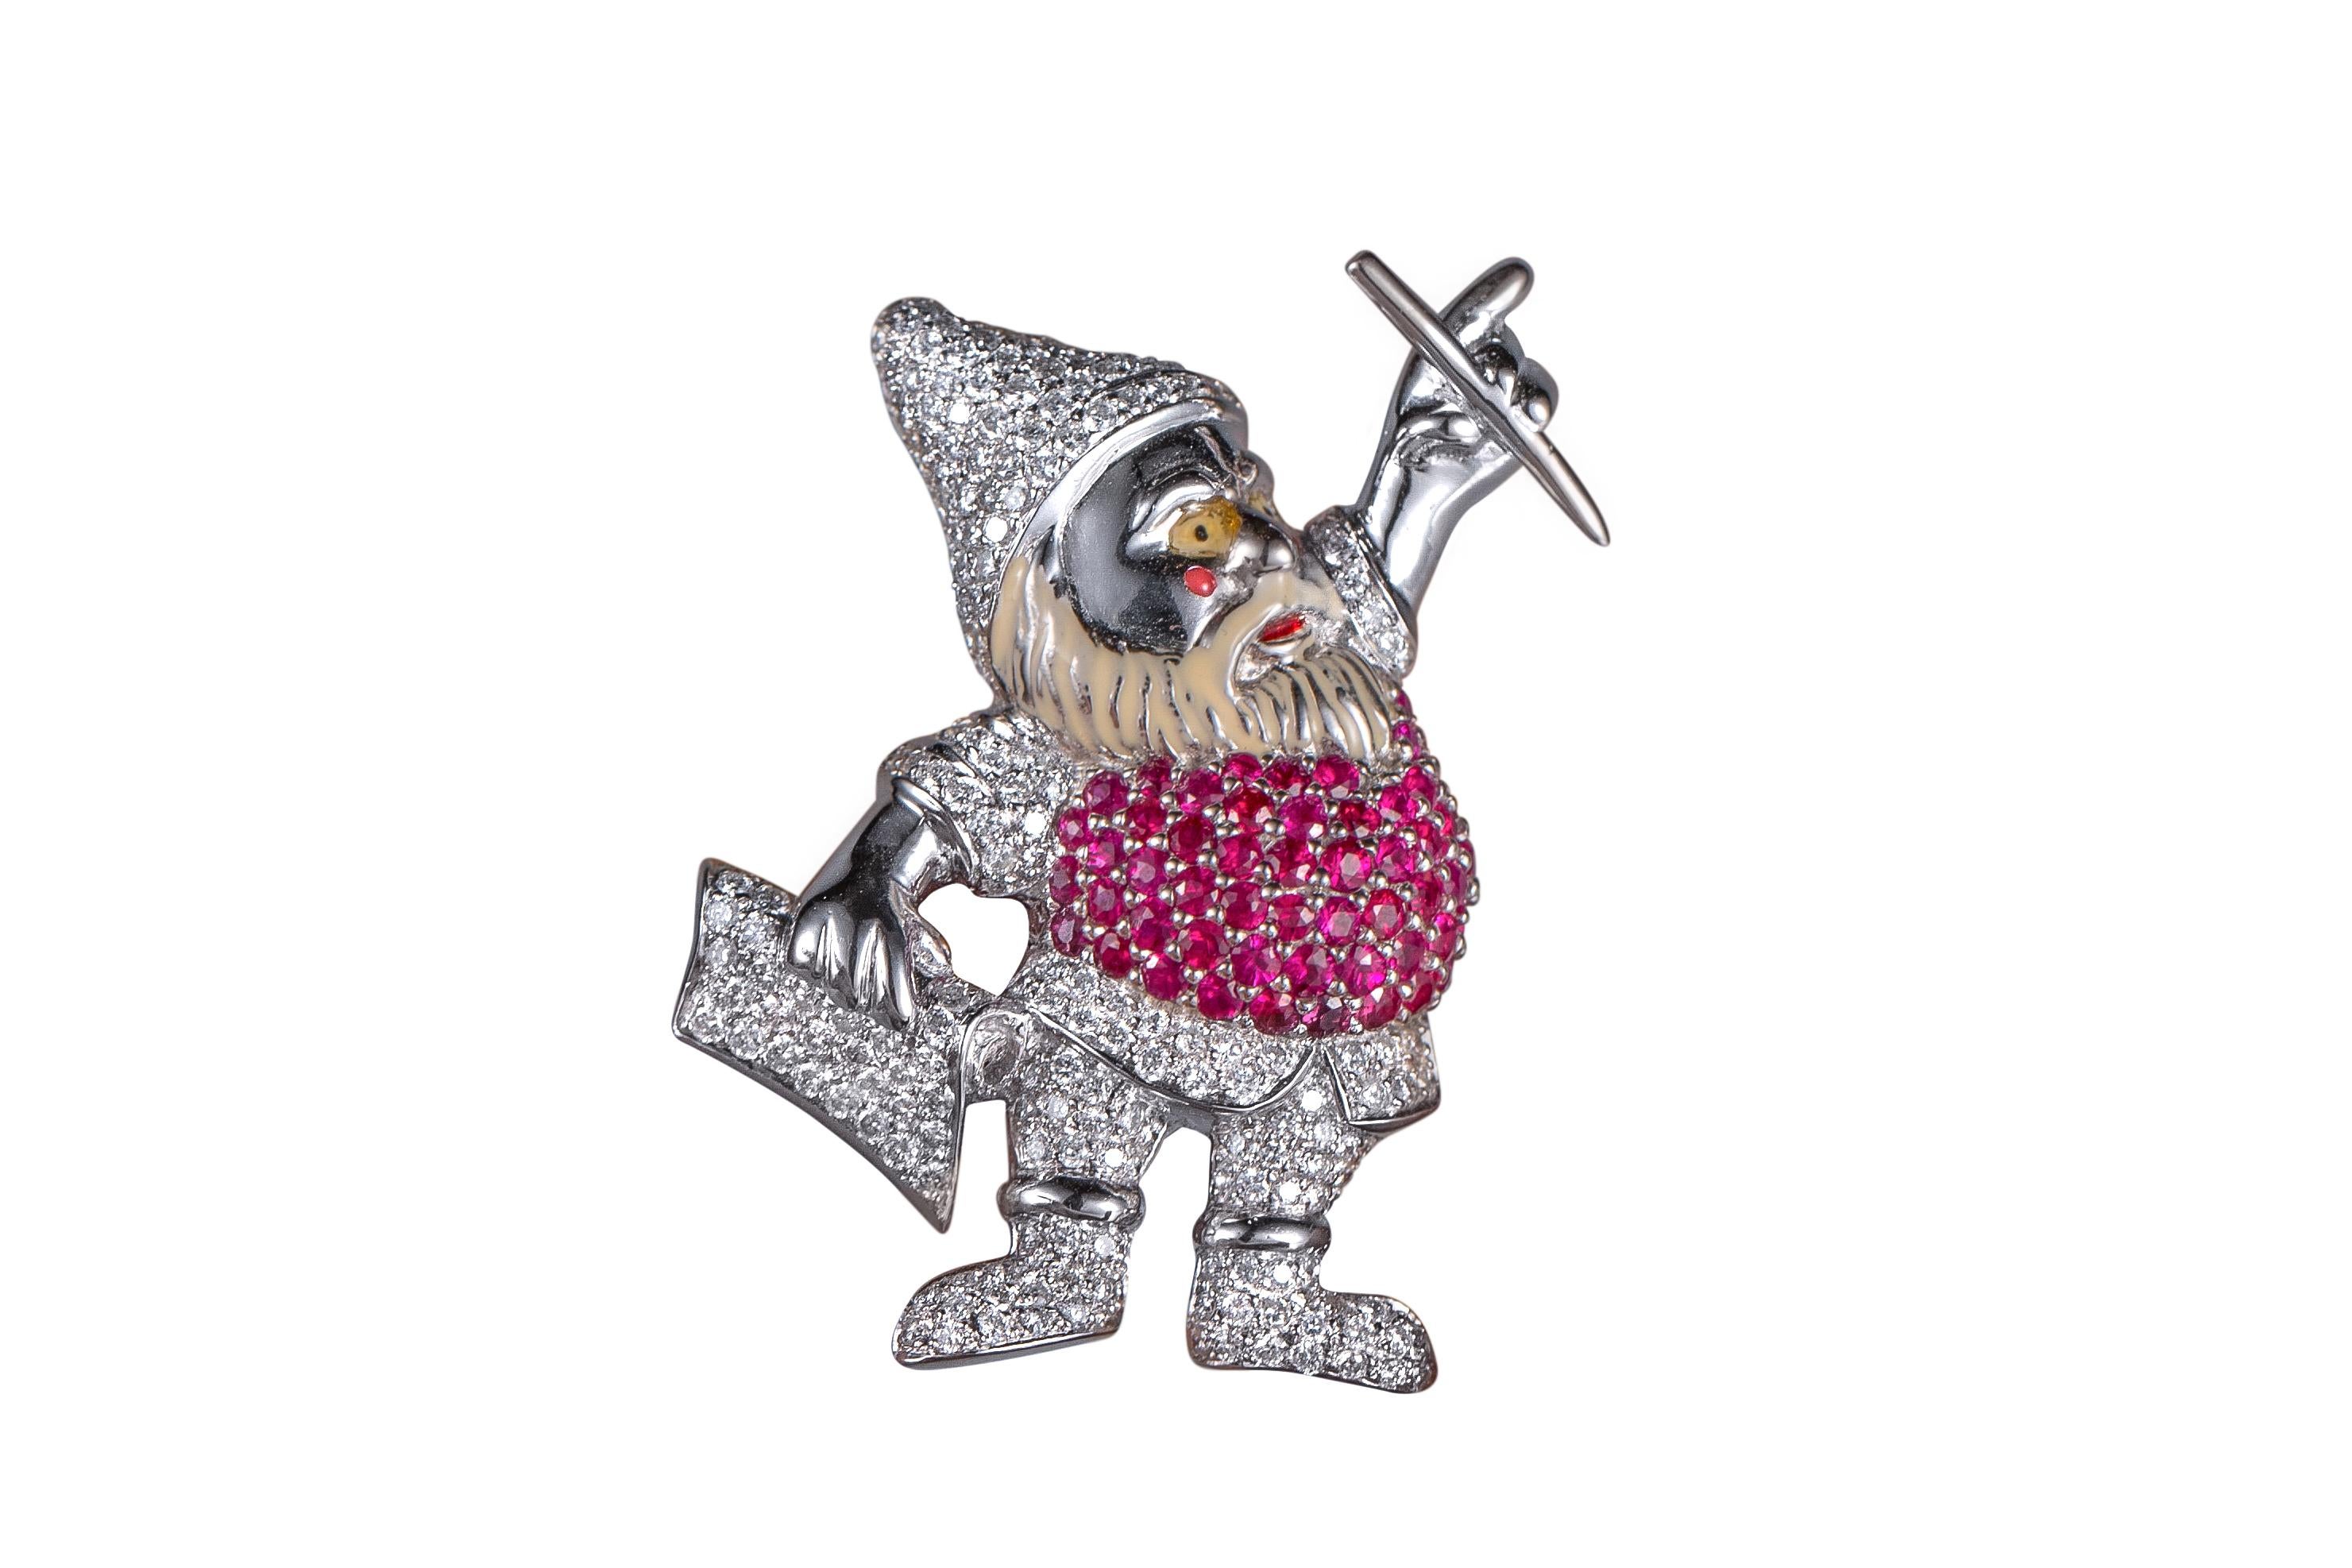 Item Details:
Metal Type: 18 Karat White Gold
Weight: 15 grams
Measurements: 2 inch height x 1 inch width 

Features:
Belly of Santa Claus features .8 carat total of Ruby
Eyes and Beard of Santa Claus feature Enamel
The rest of the pin brooch